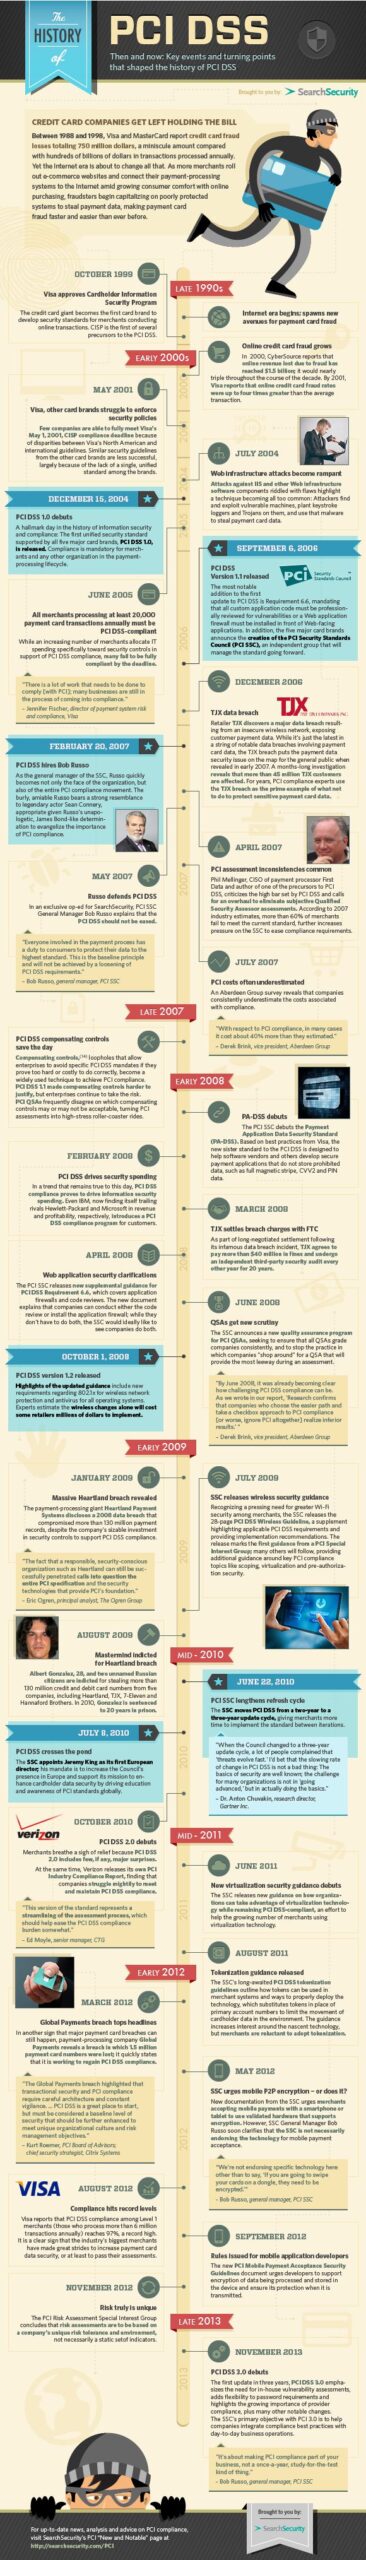 Infographic depicting the history of Star Trek with IT consulting expertise.